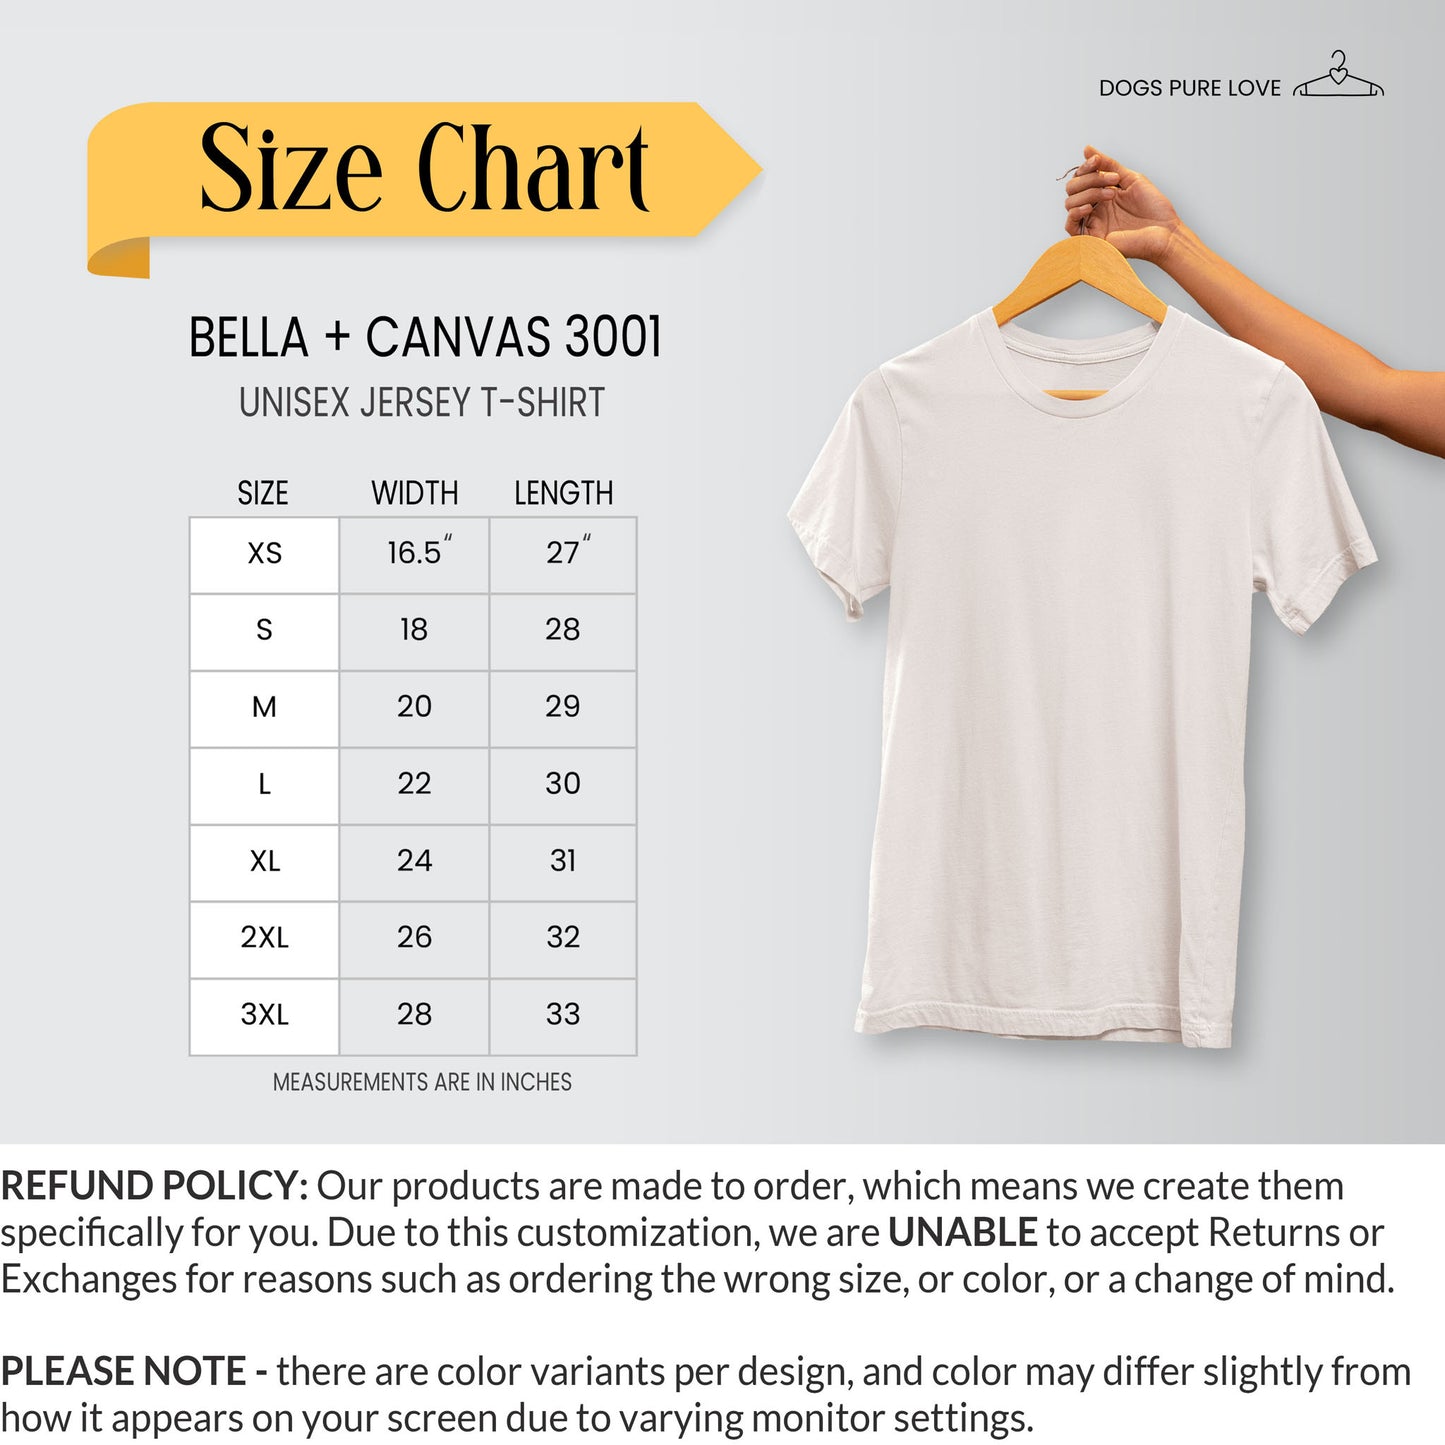 A size chart displays various t-shirt dimensions by Dogs Pure Love. Underneath is a refund policy description.